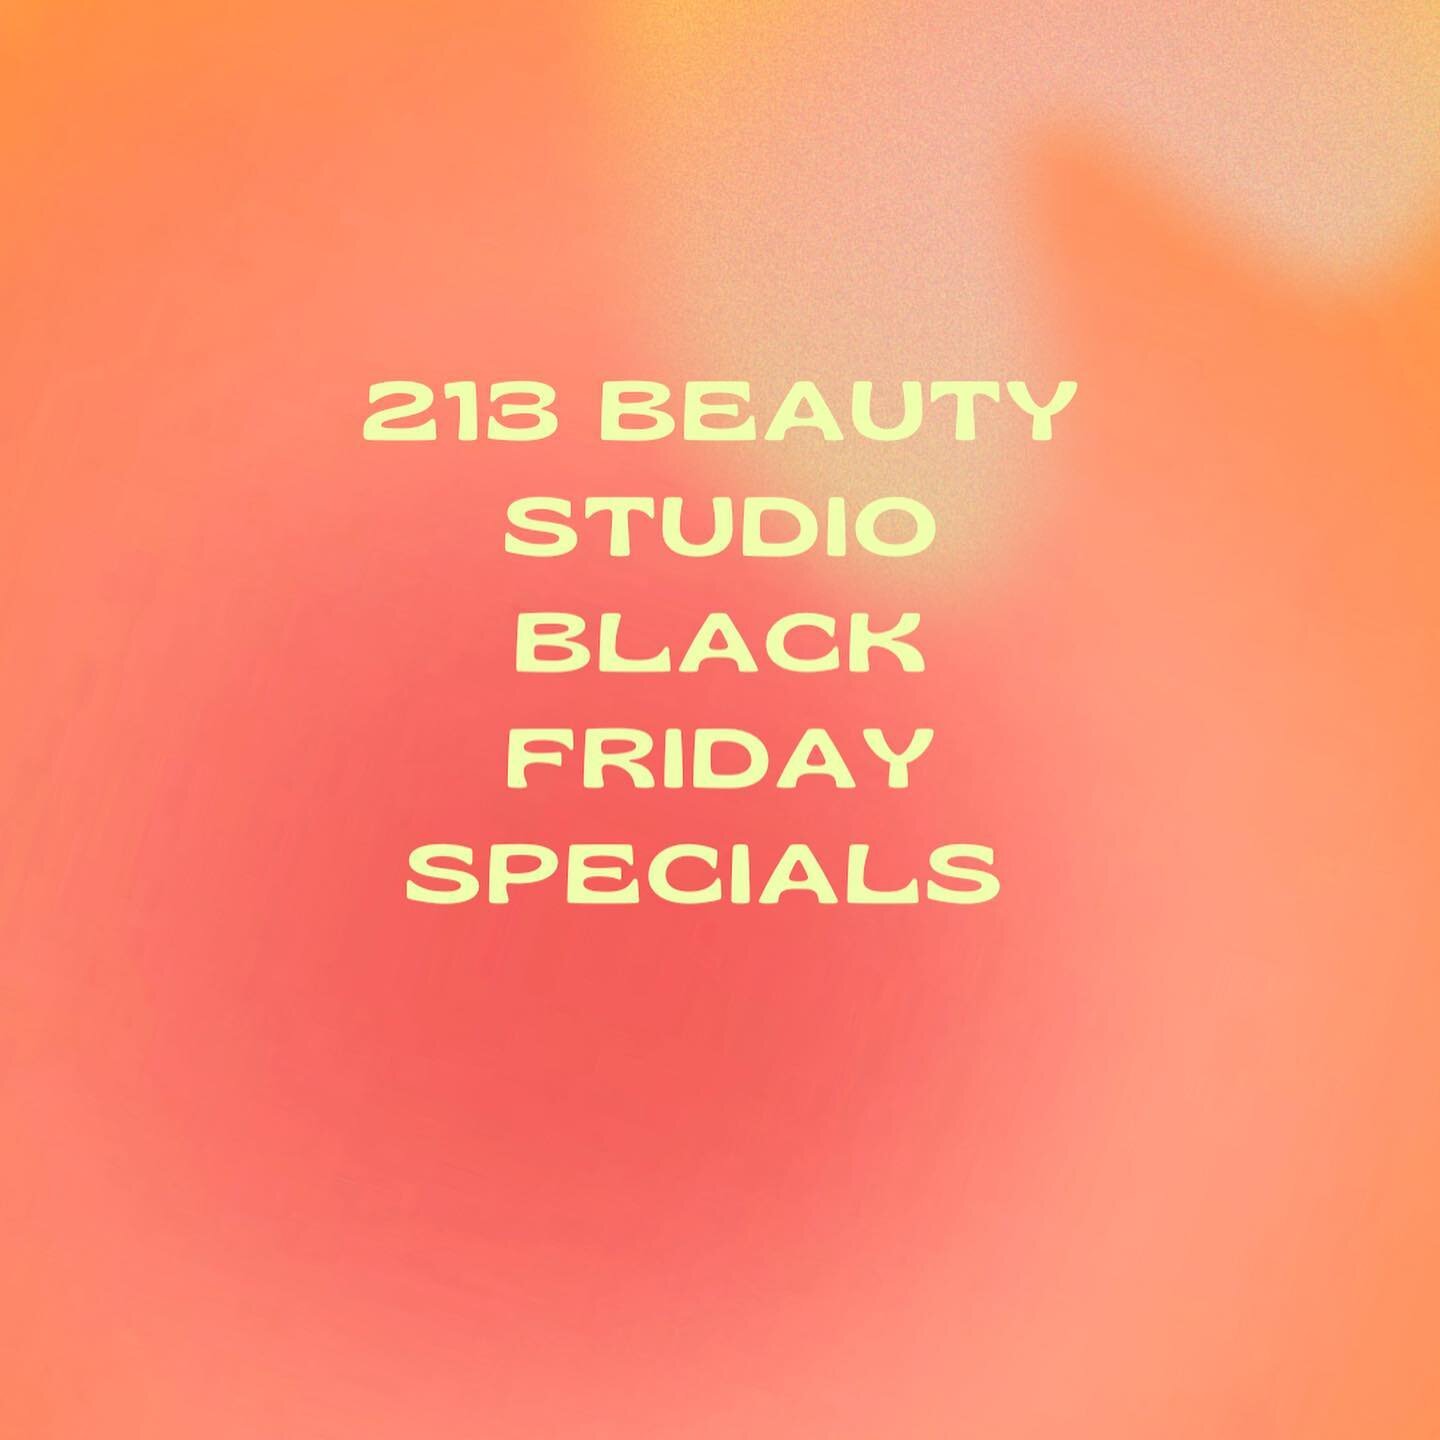 Swipe to see our Black Friday deals! 💅💅💅💅 
DM each individual artist for details 
Rules are that you must reserve your future date between now through November 28!